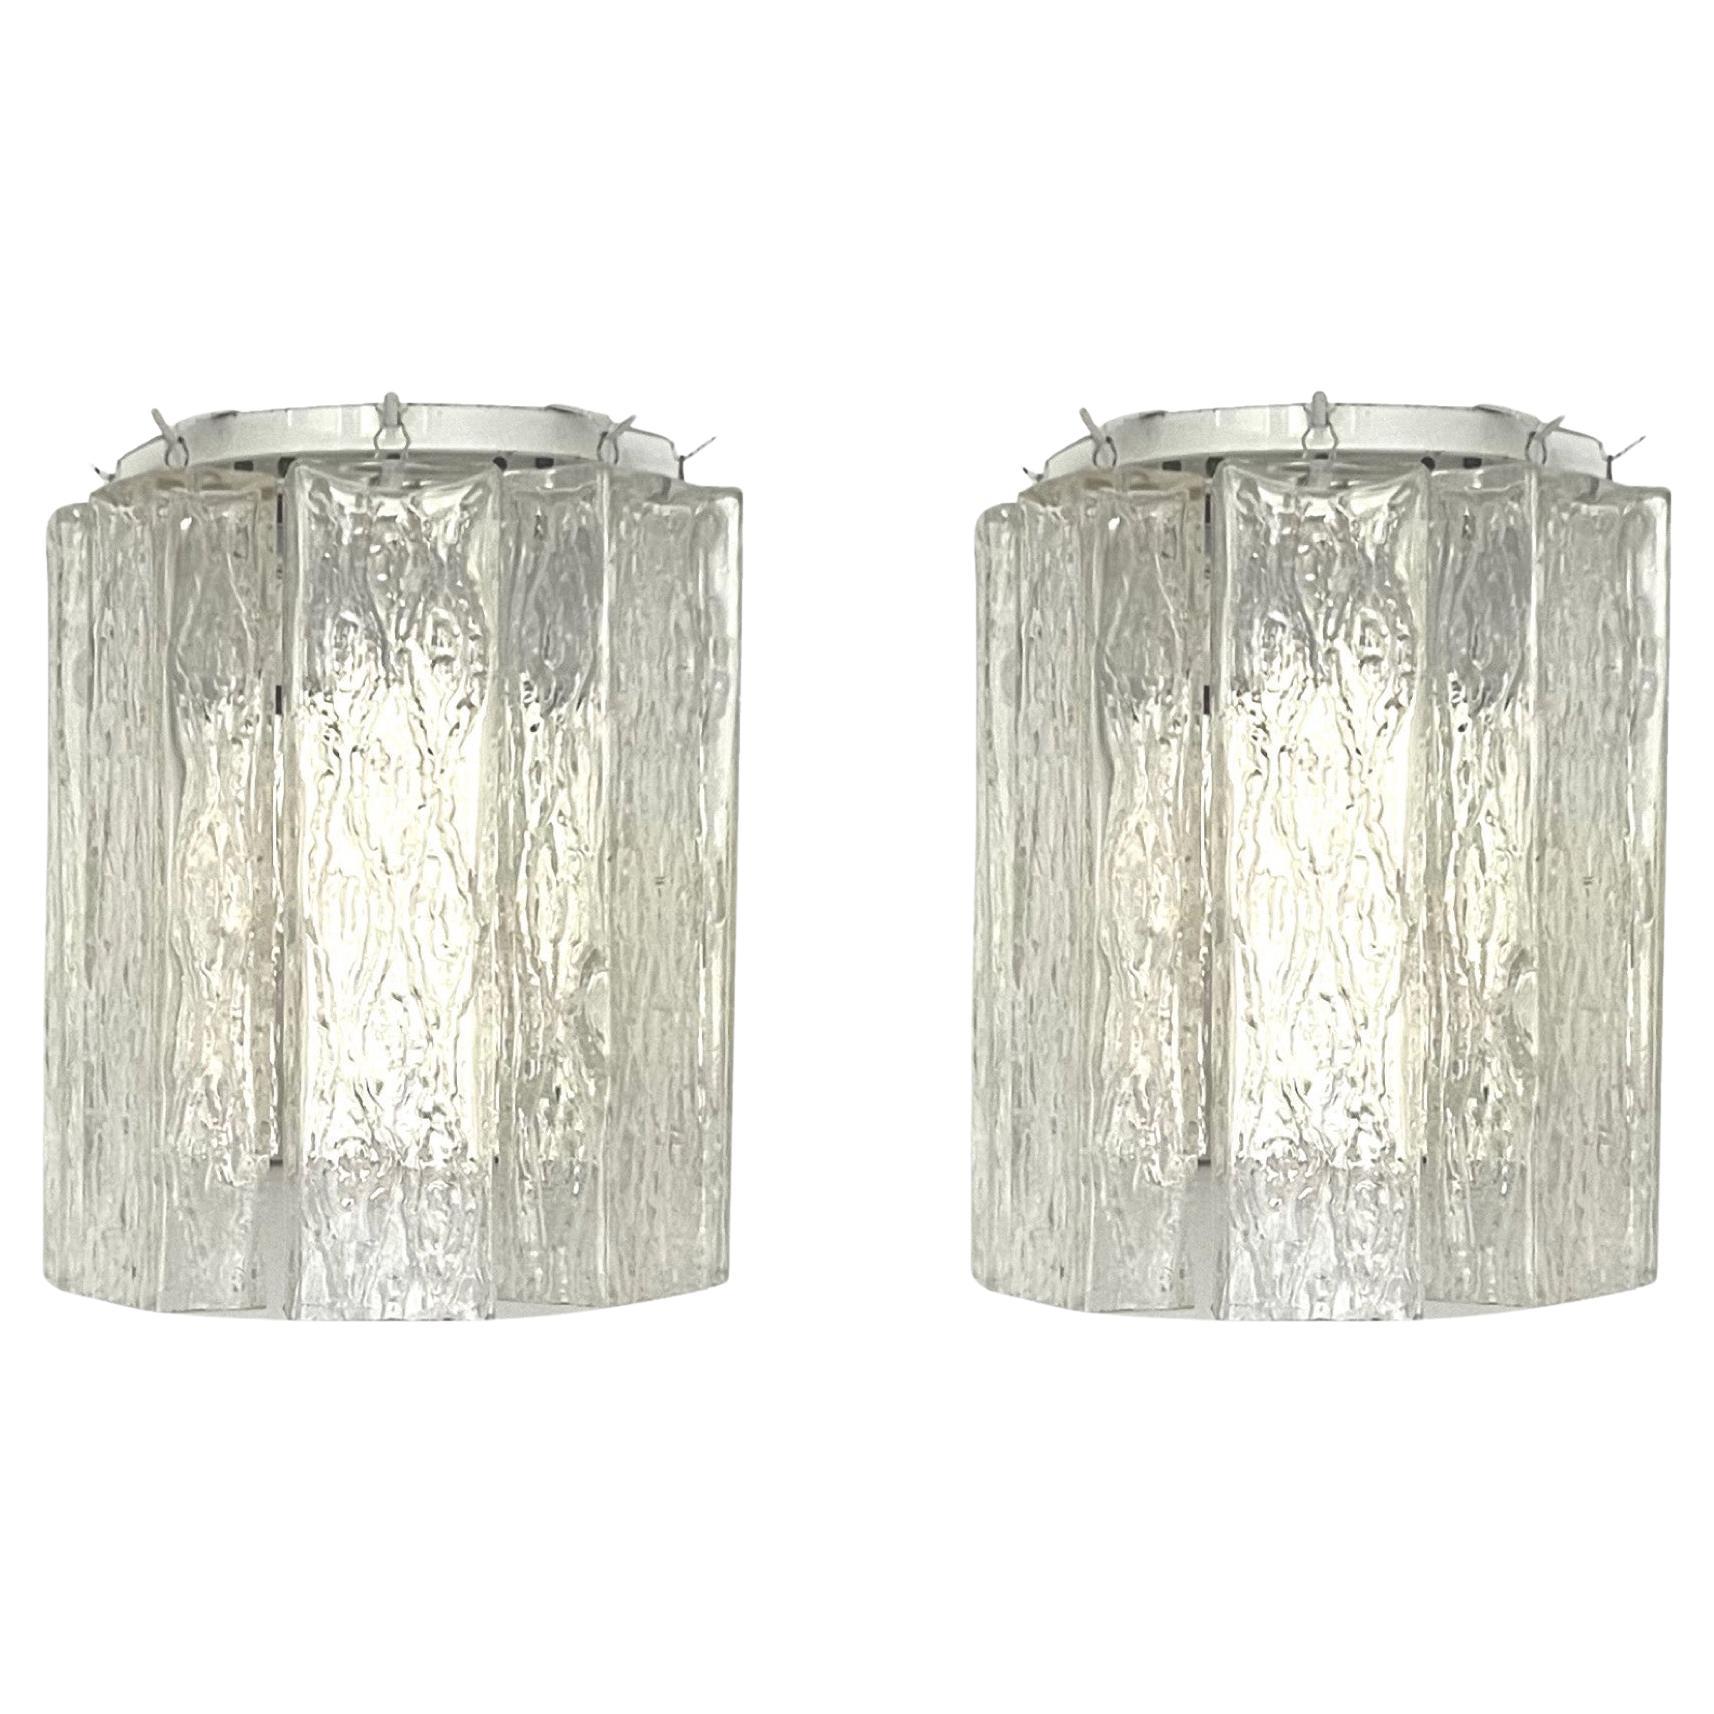 Italian Mid-Century Murano Pair of Wall Sconces by Zuccheri for Venini, 1970s For Sale